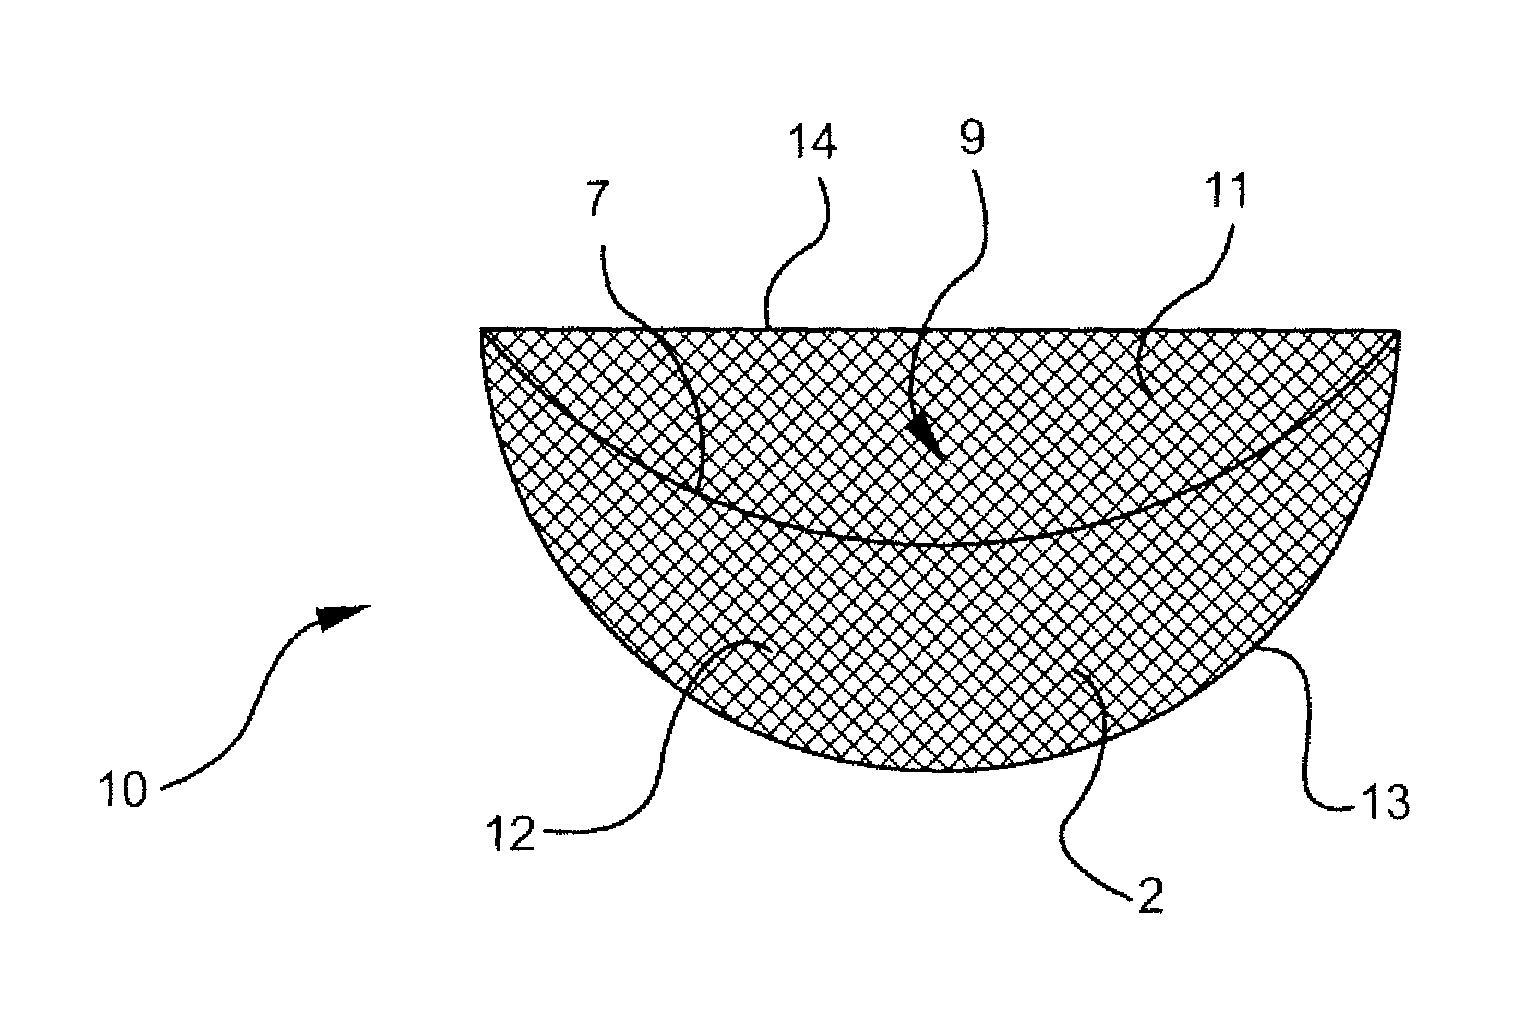 Naturally contoured, preformed, three dimensional mesh device for breast implant support